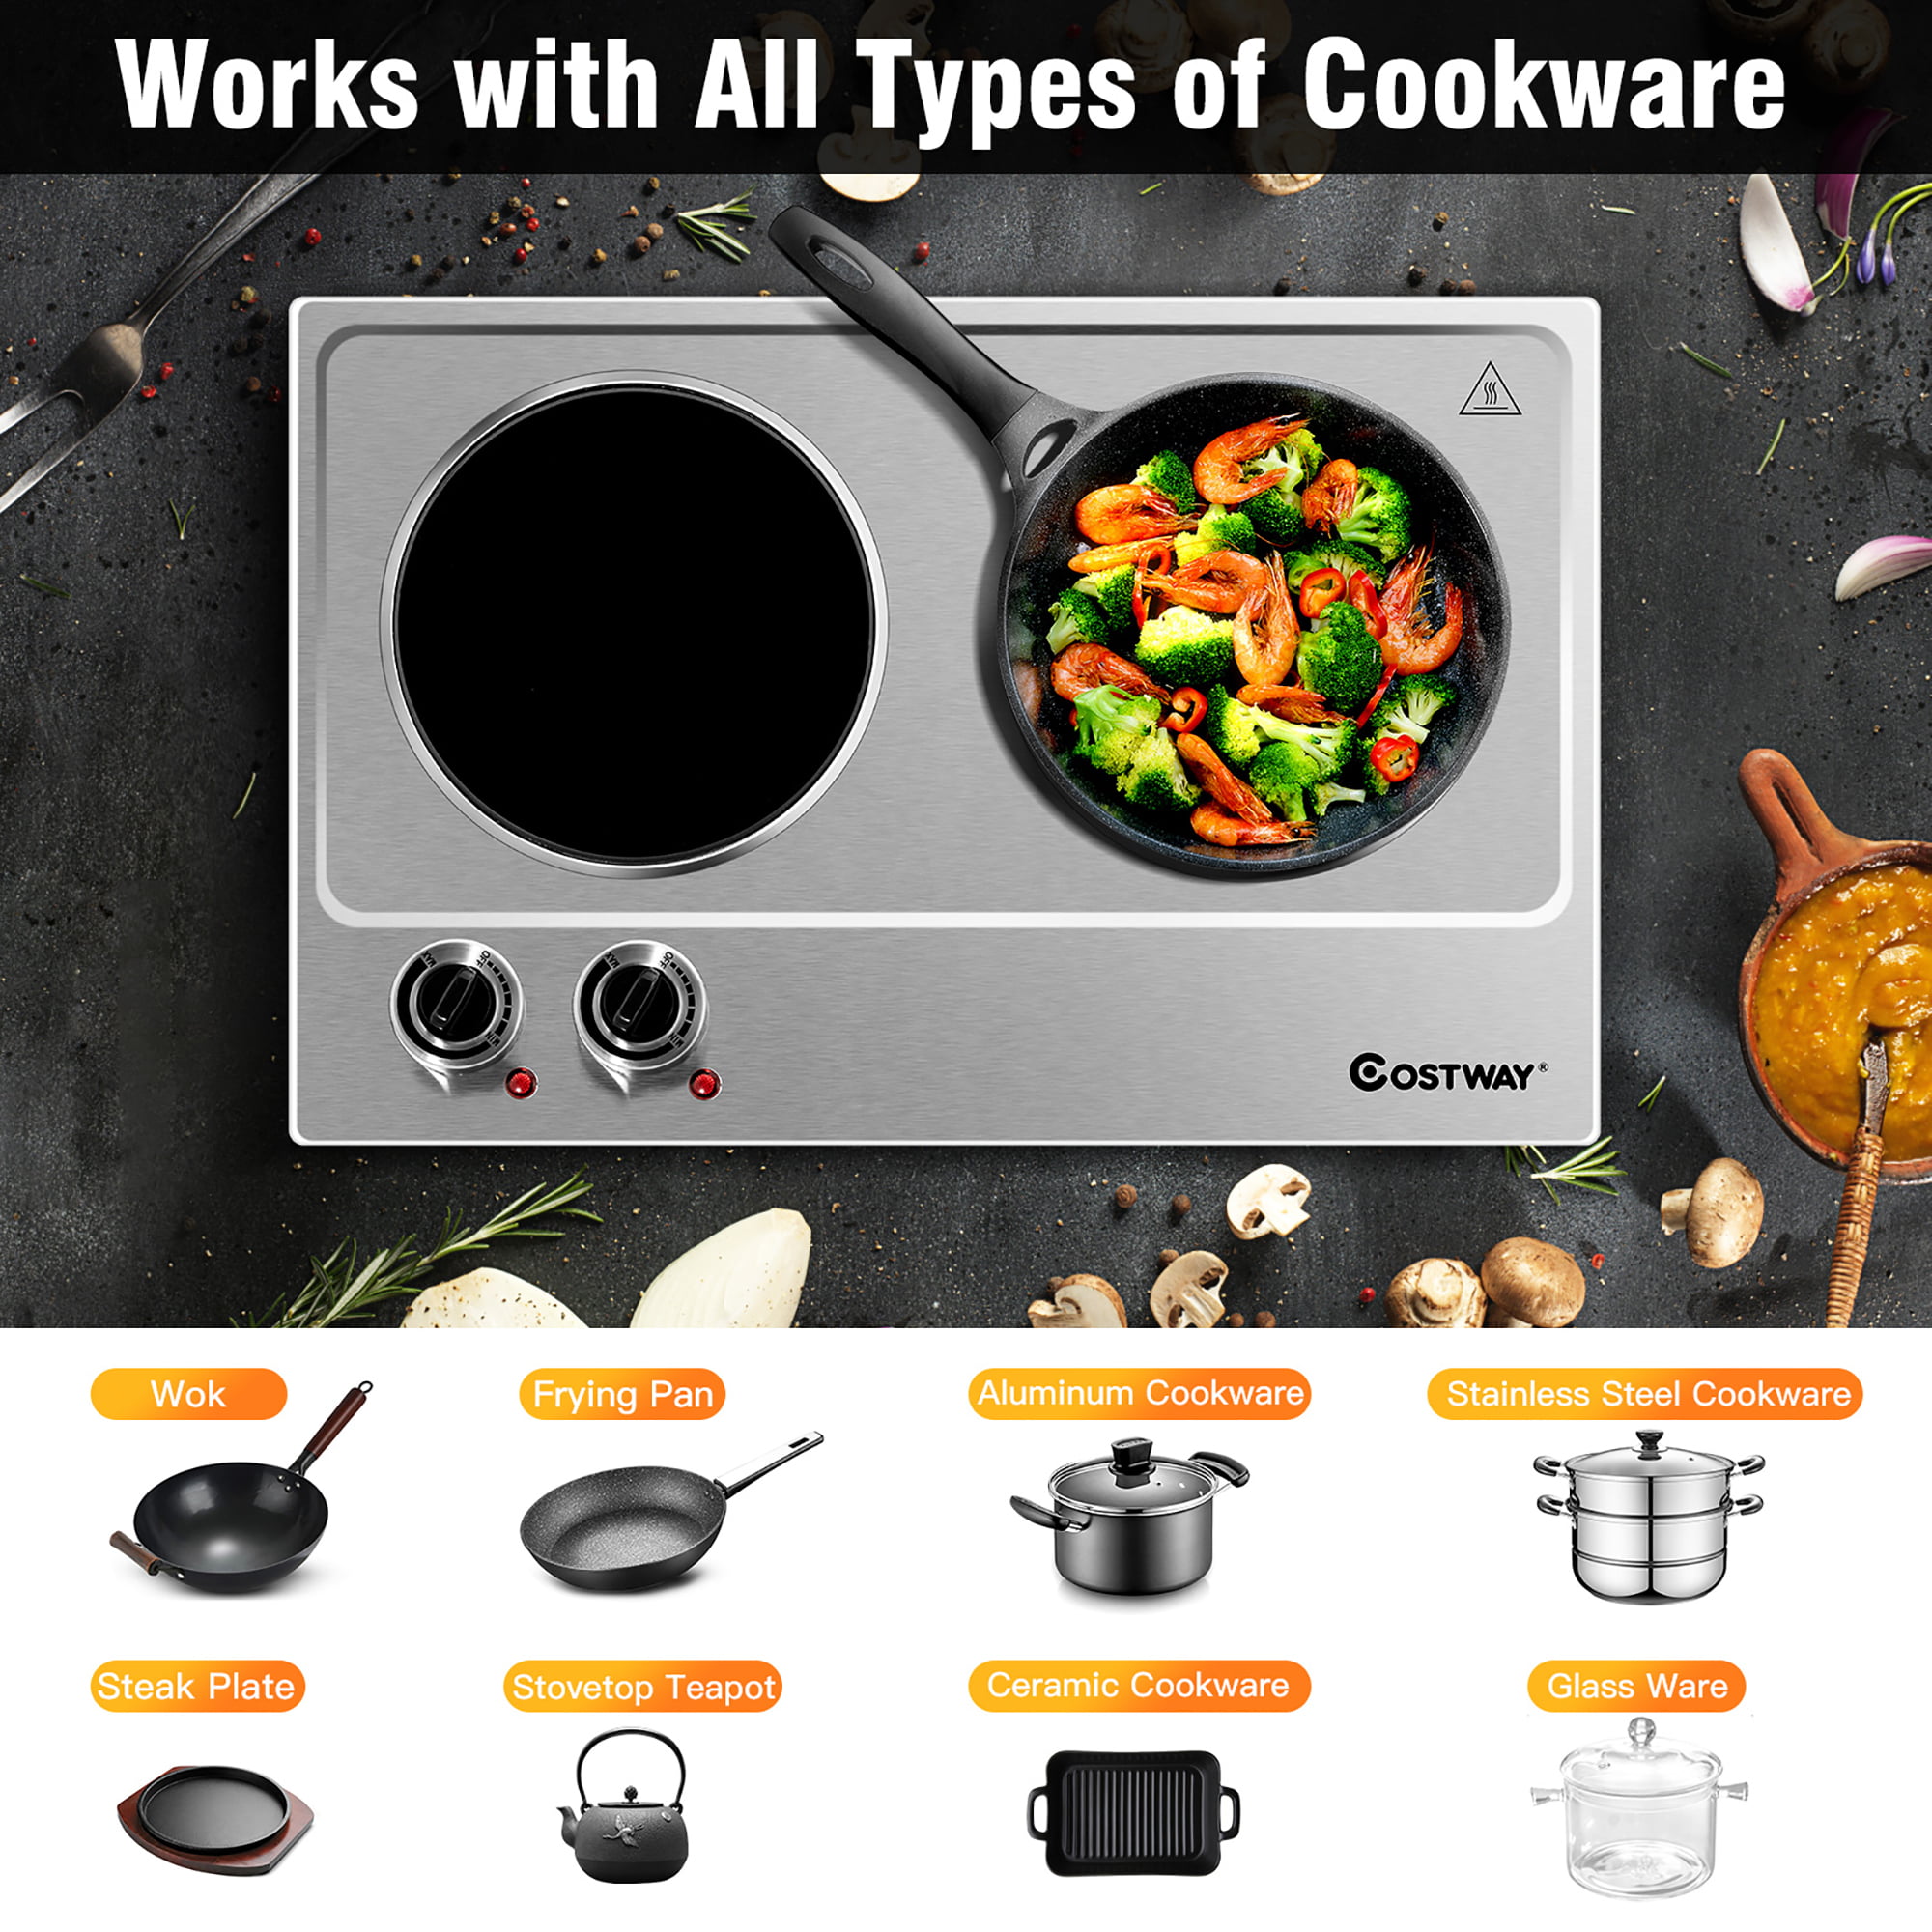 Costway EP24636US 1800W Double Hot Plate Electric Countertop Burner  Stainless Steel 5 Power Levels